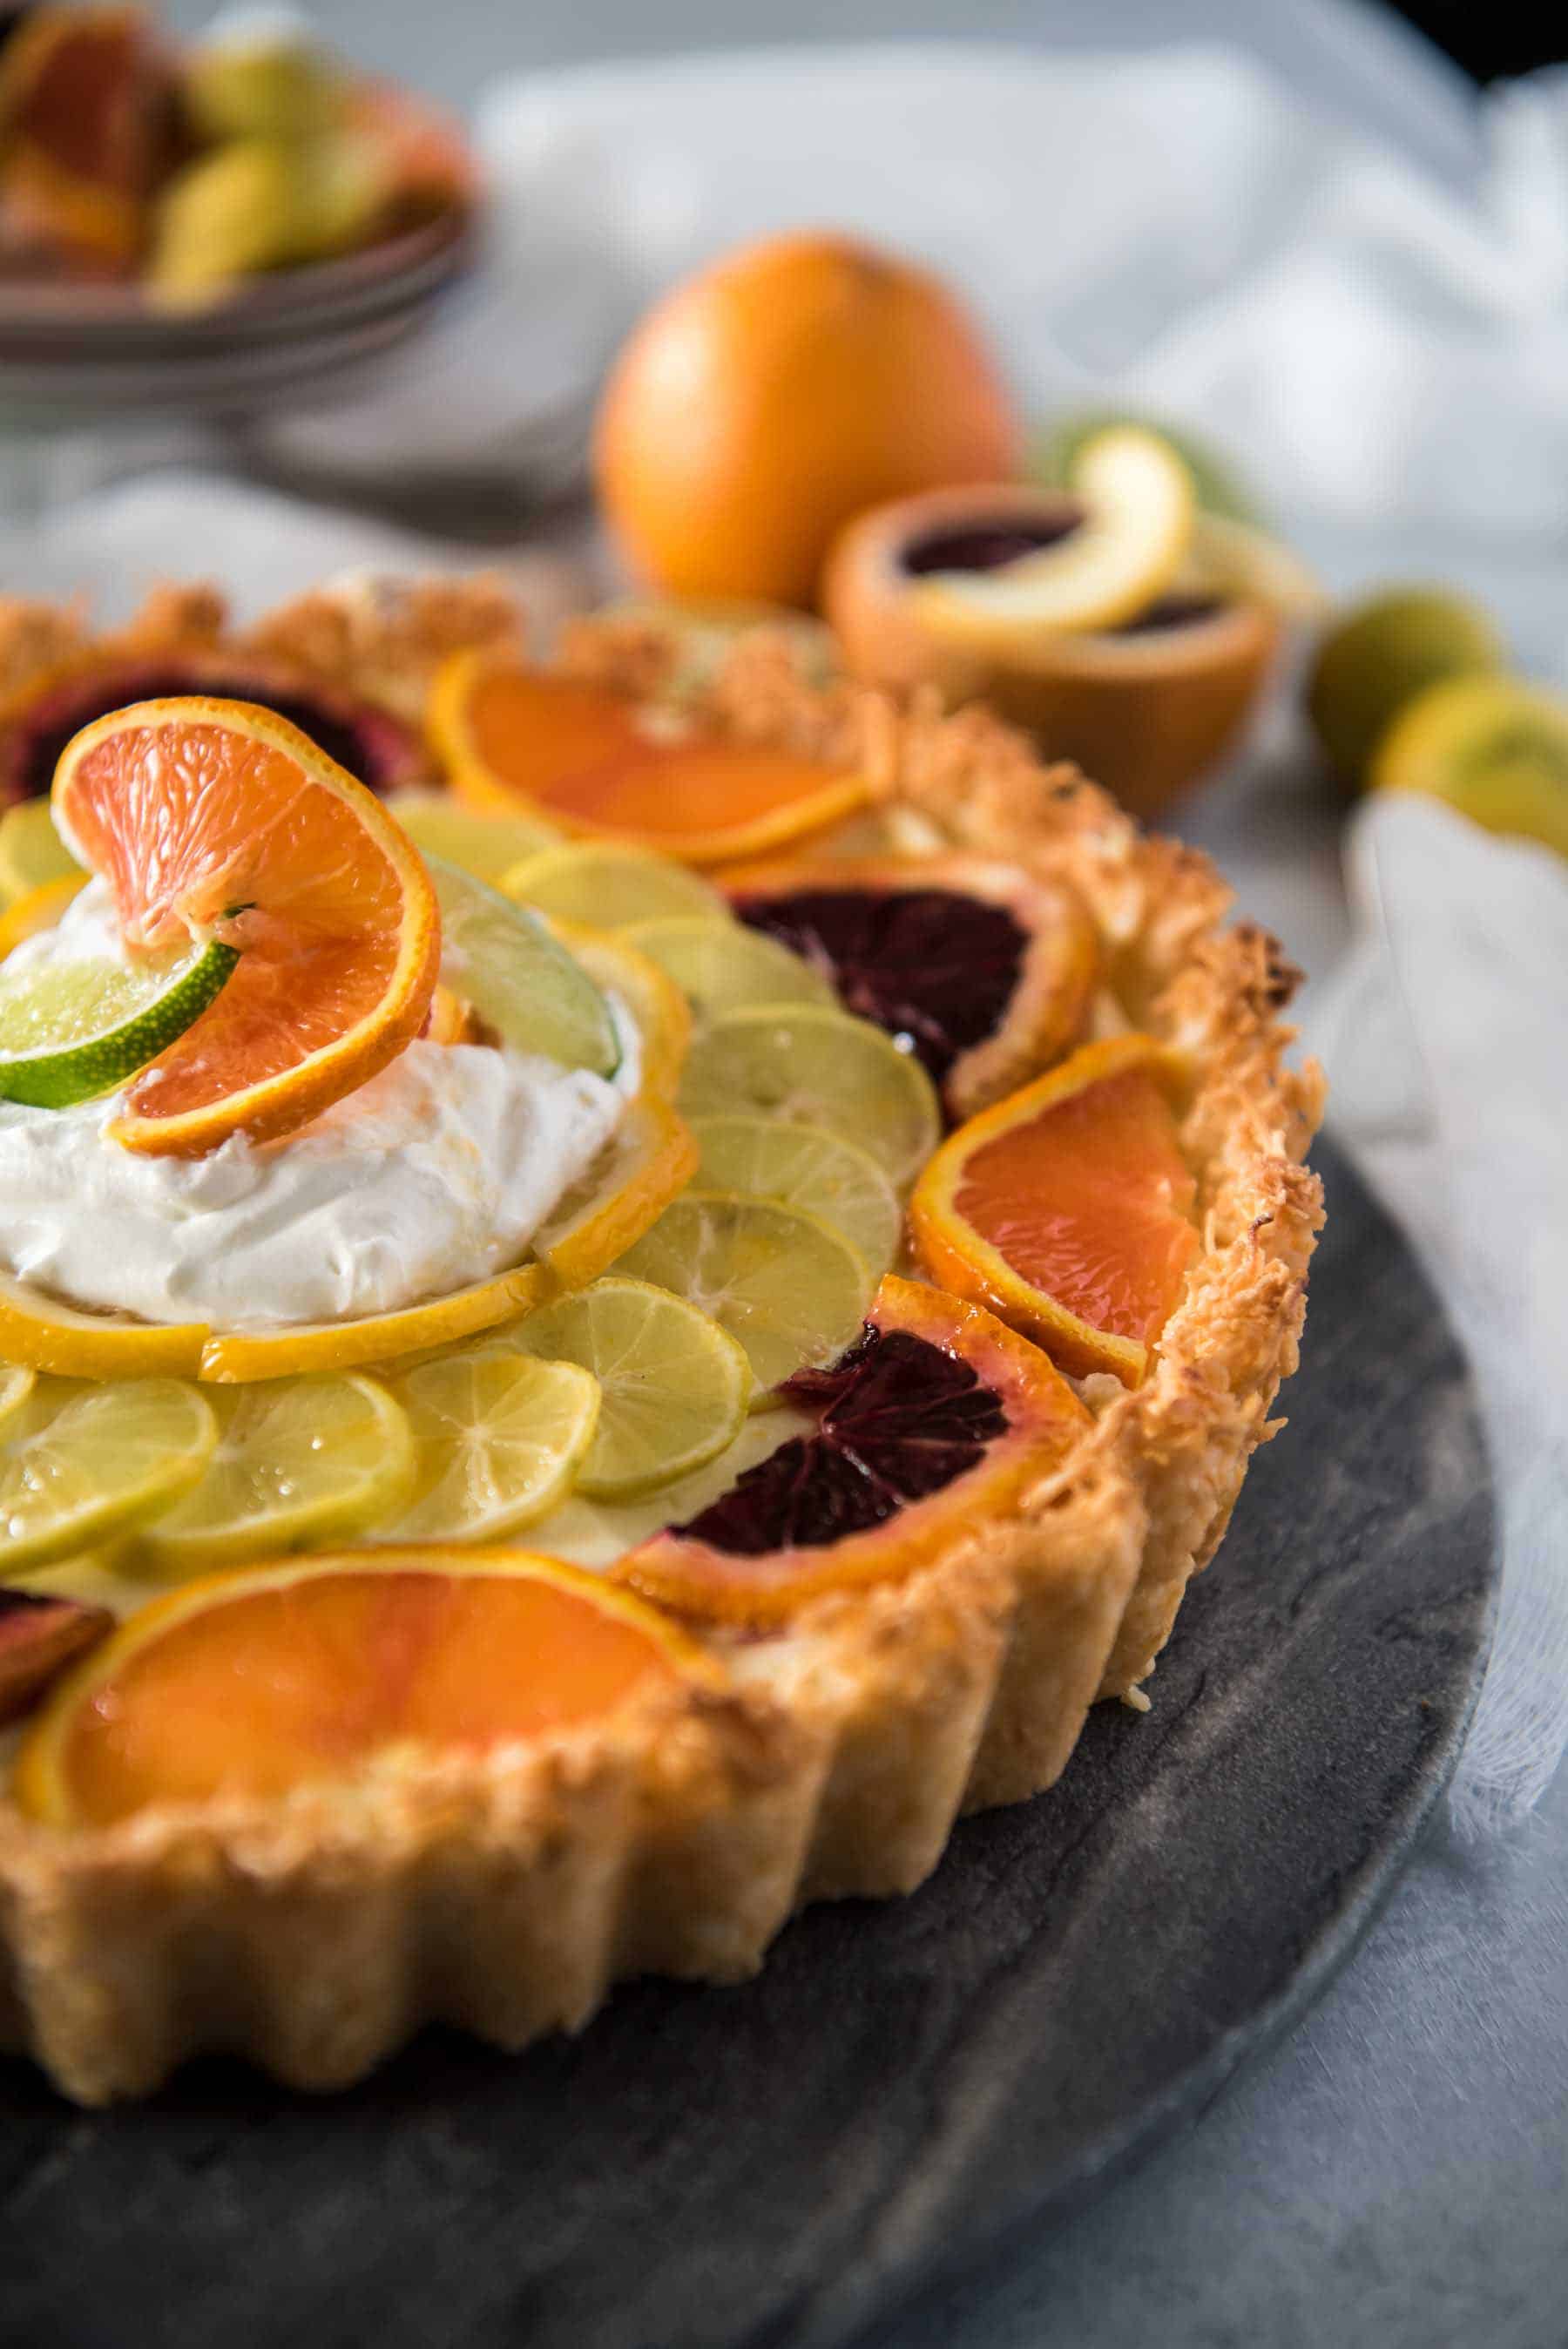 When one pie flavor just won't do - you combine three! This Triple Citrus Macaroon Mascarpone Tart is the perfect blend of sweet & tart, dense & fluffy, and is nestled in a (surprise!) coconut macaroon shell.